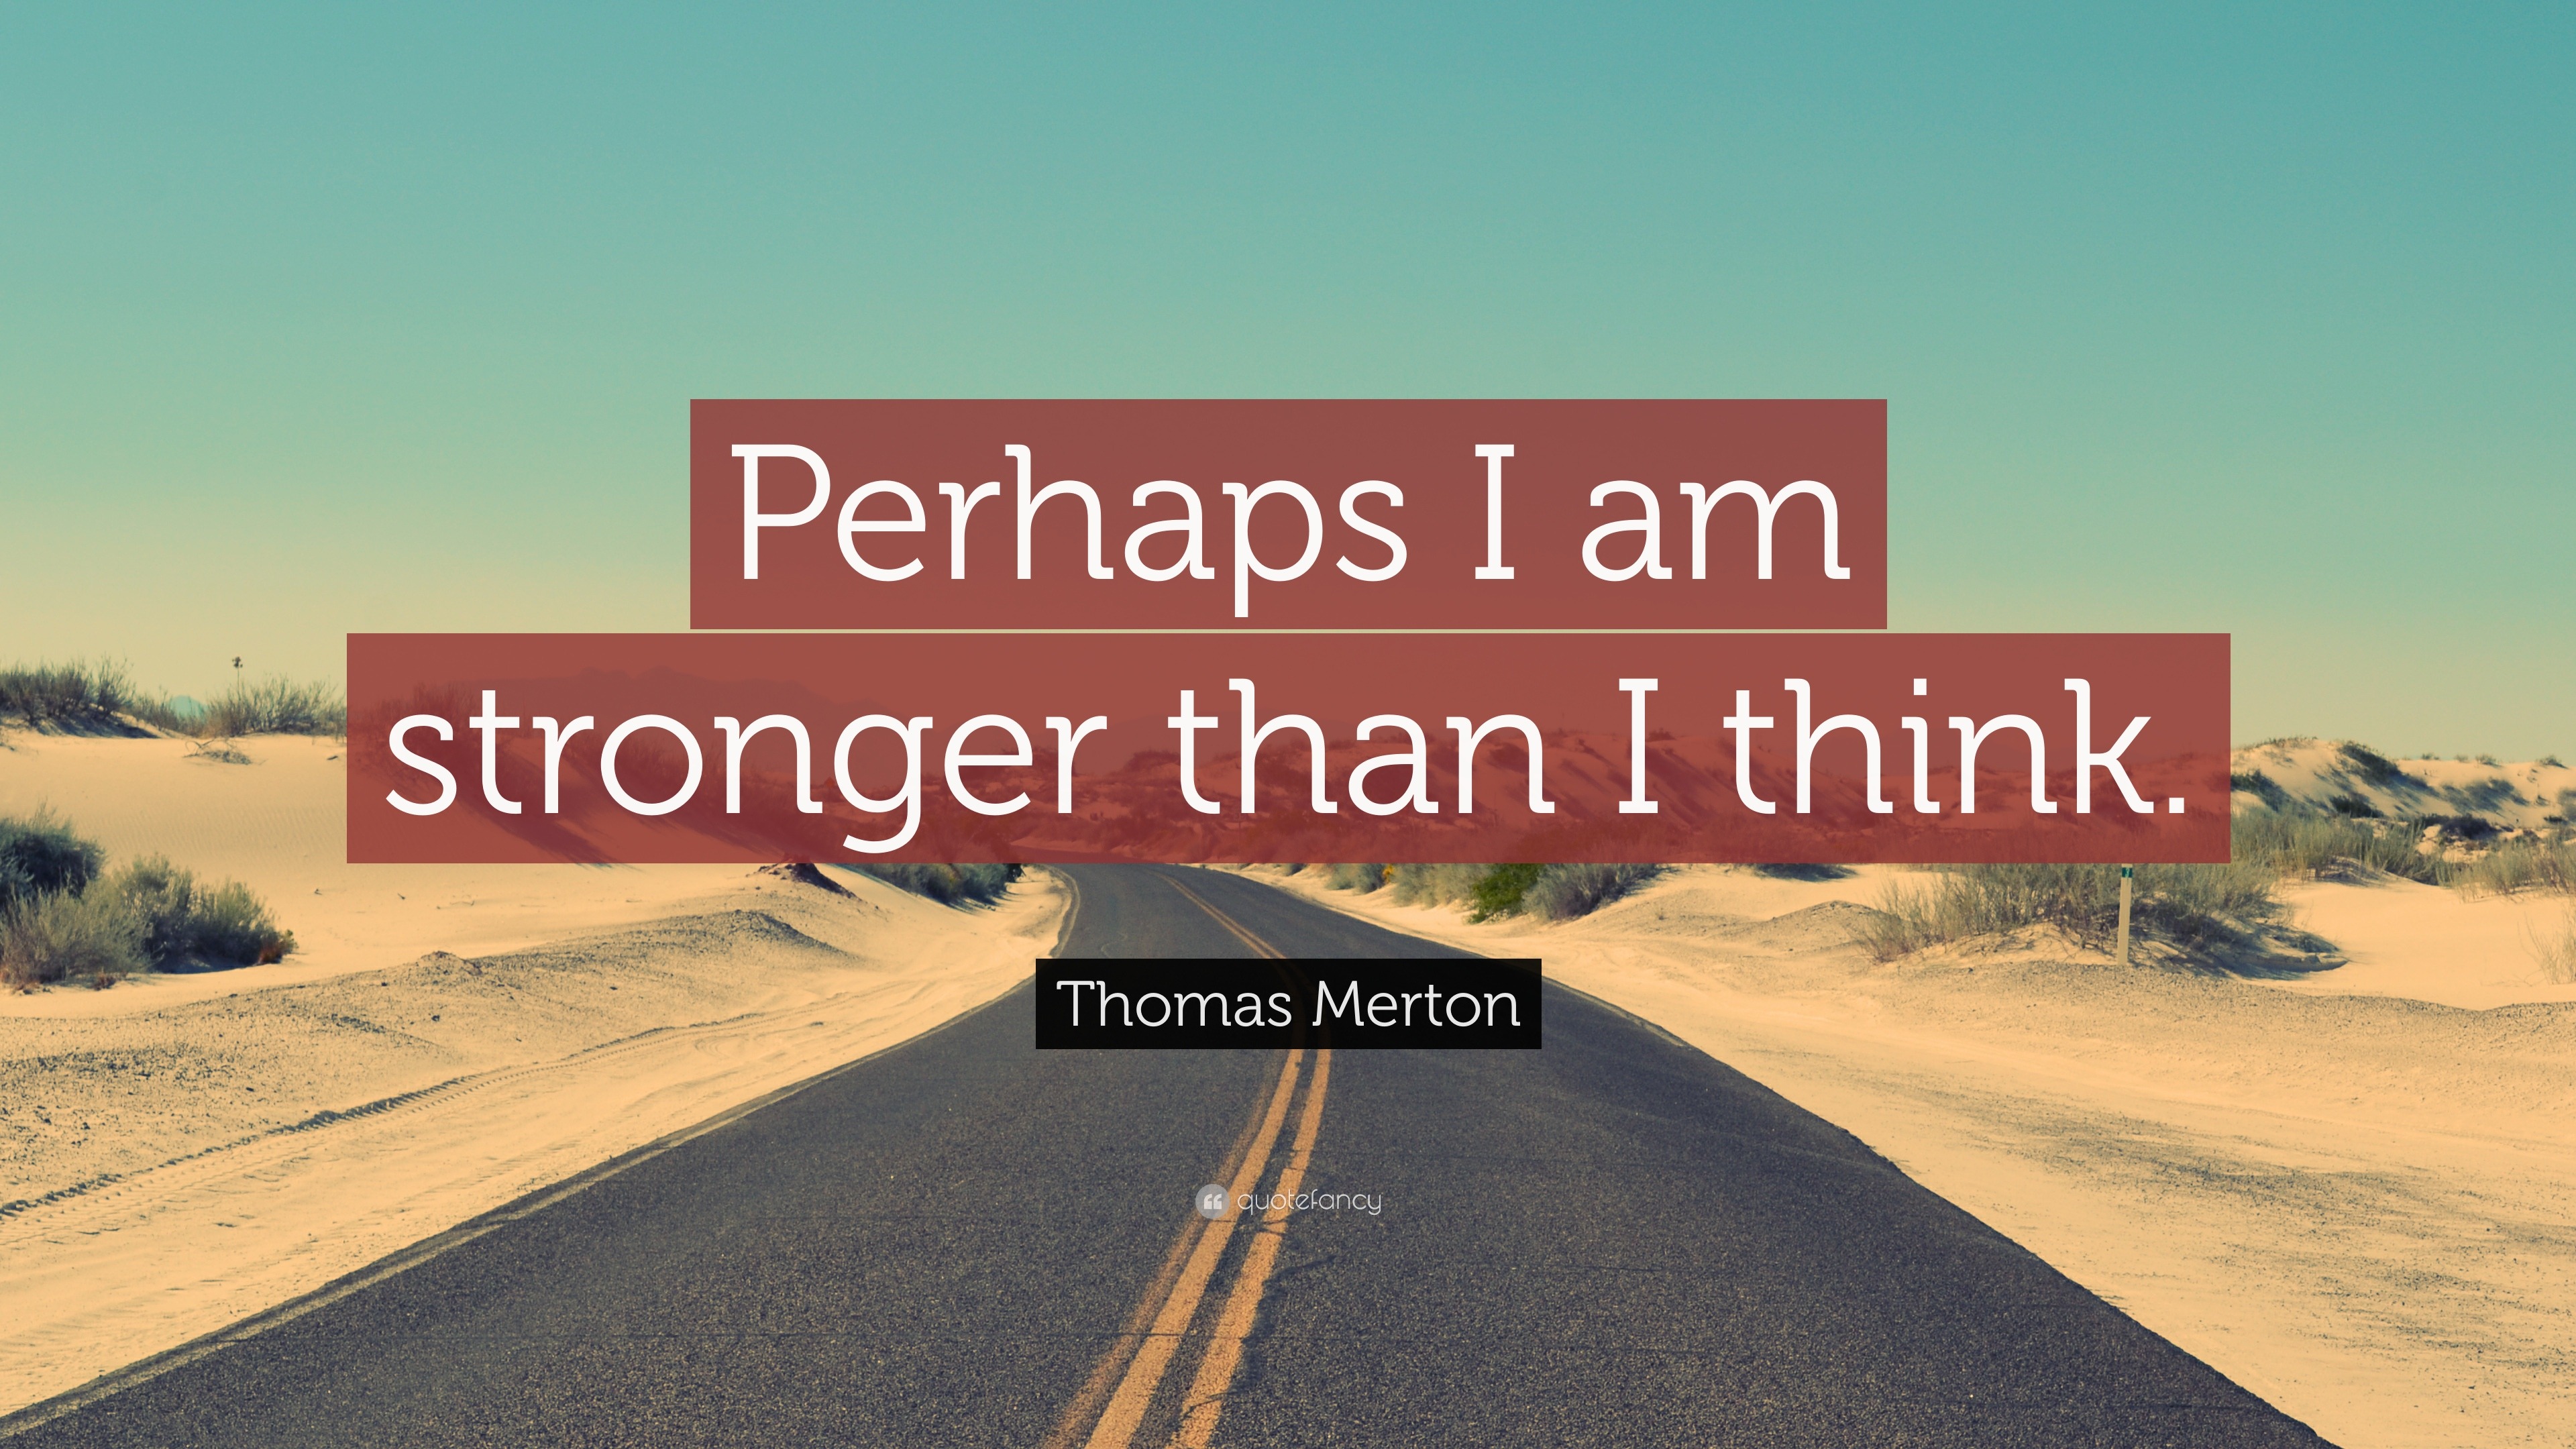 Thomas Merton Quote: "Perhaps I am stronger than I think." (24 wallpapers) - Quotefancy